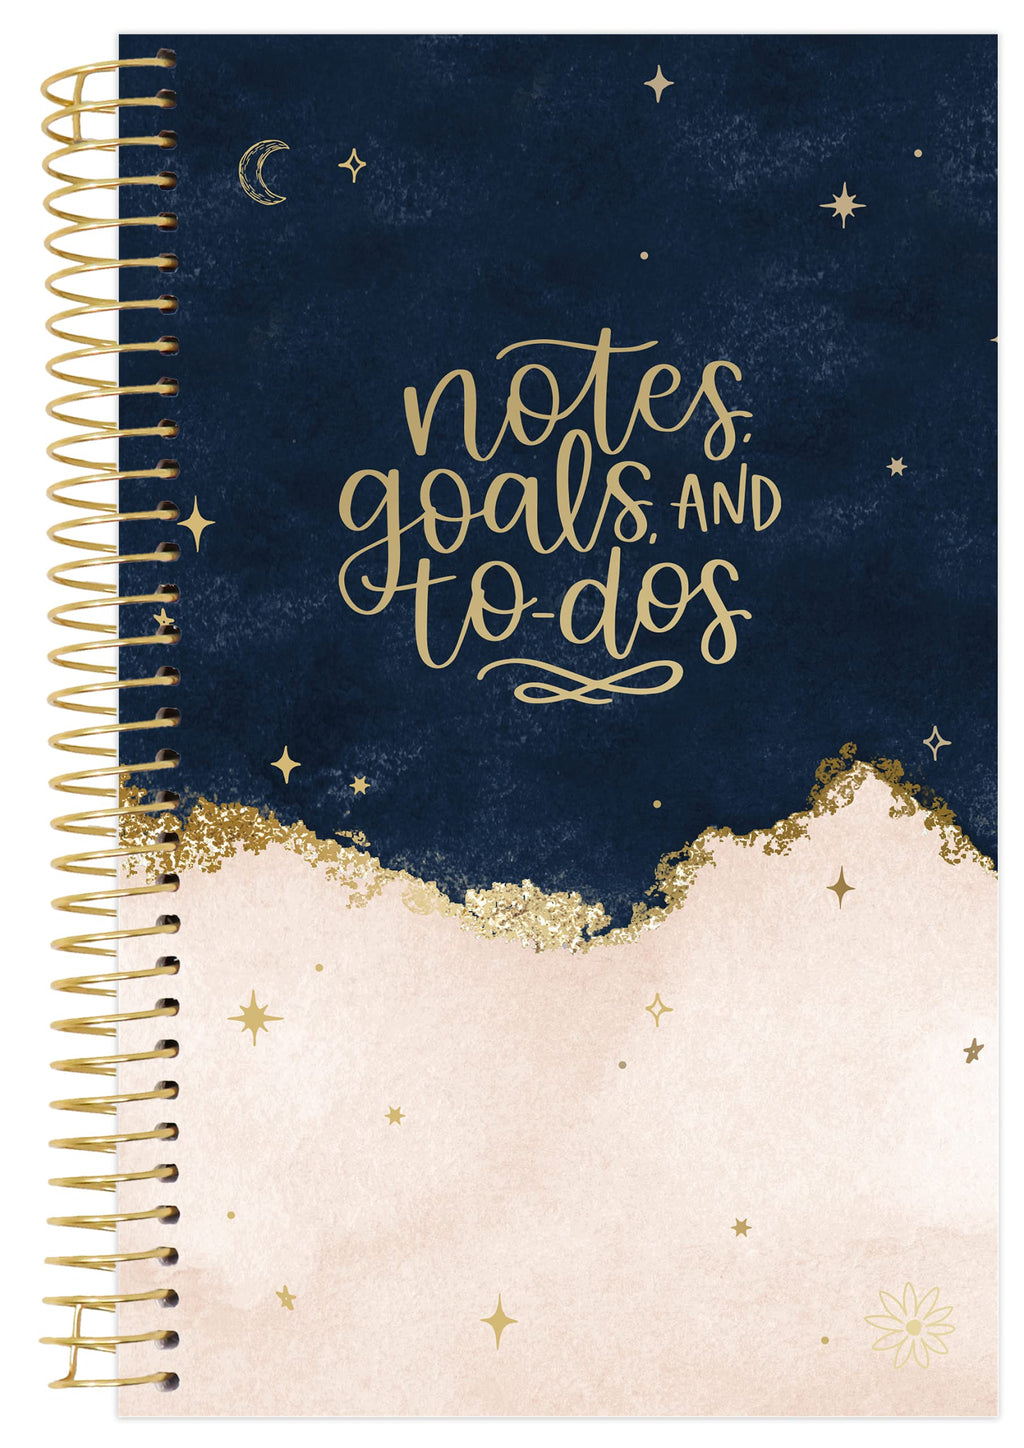 [Australia - AusPower] - bloom daily planners Bound to-Do List Book - UNDATED Daily Planning System Tear Off Calendar Pages - 6" x 8.25" - Celestial 